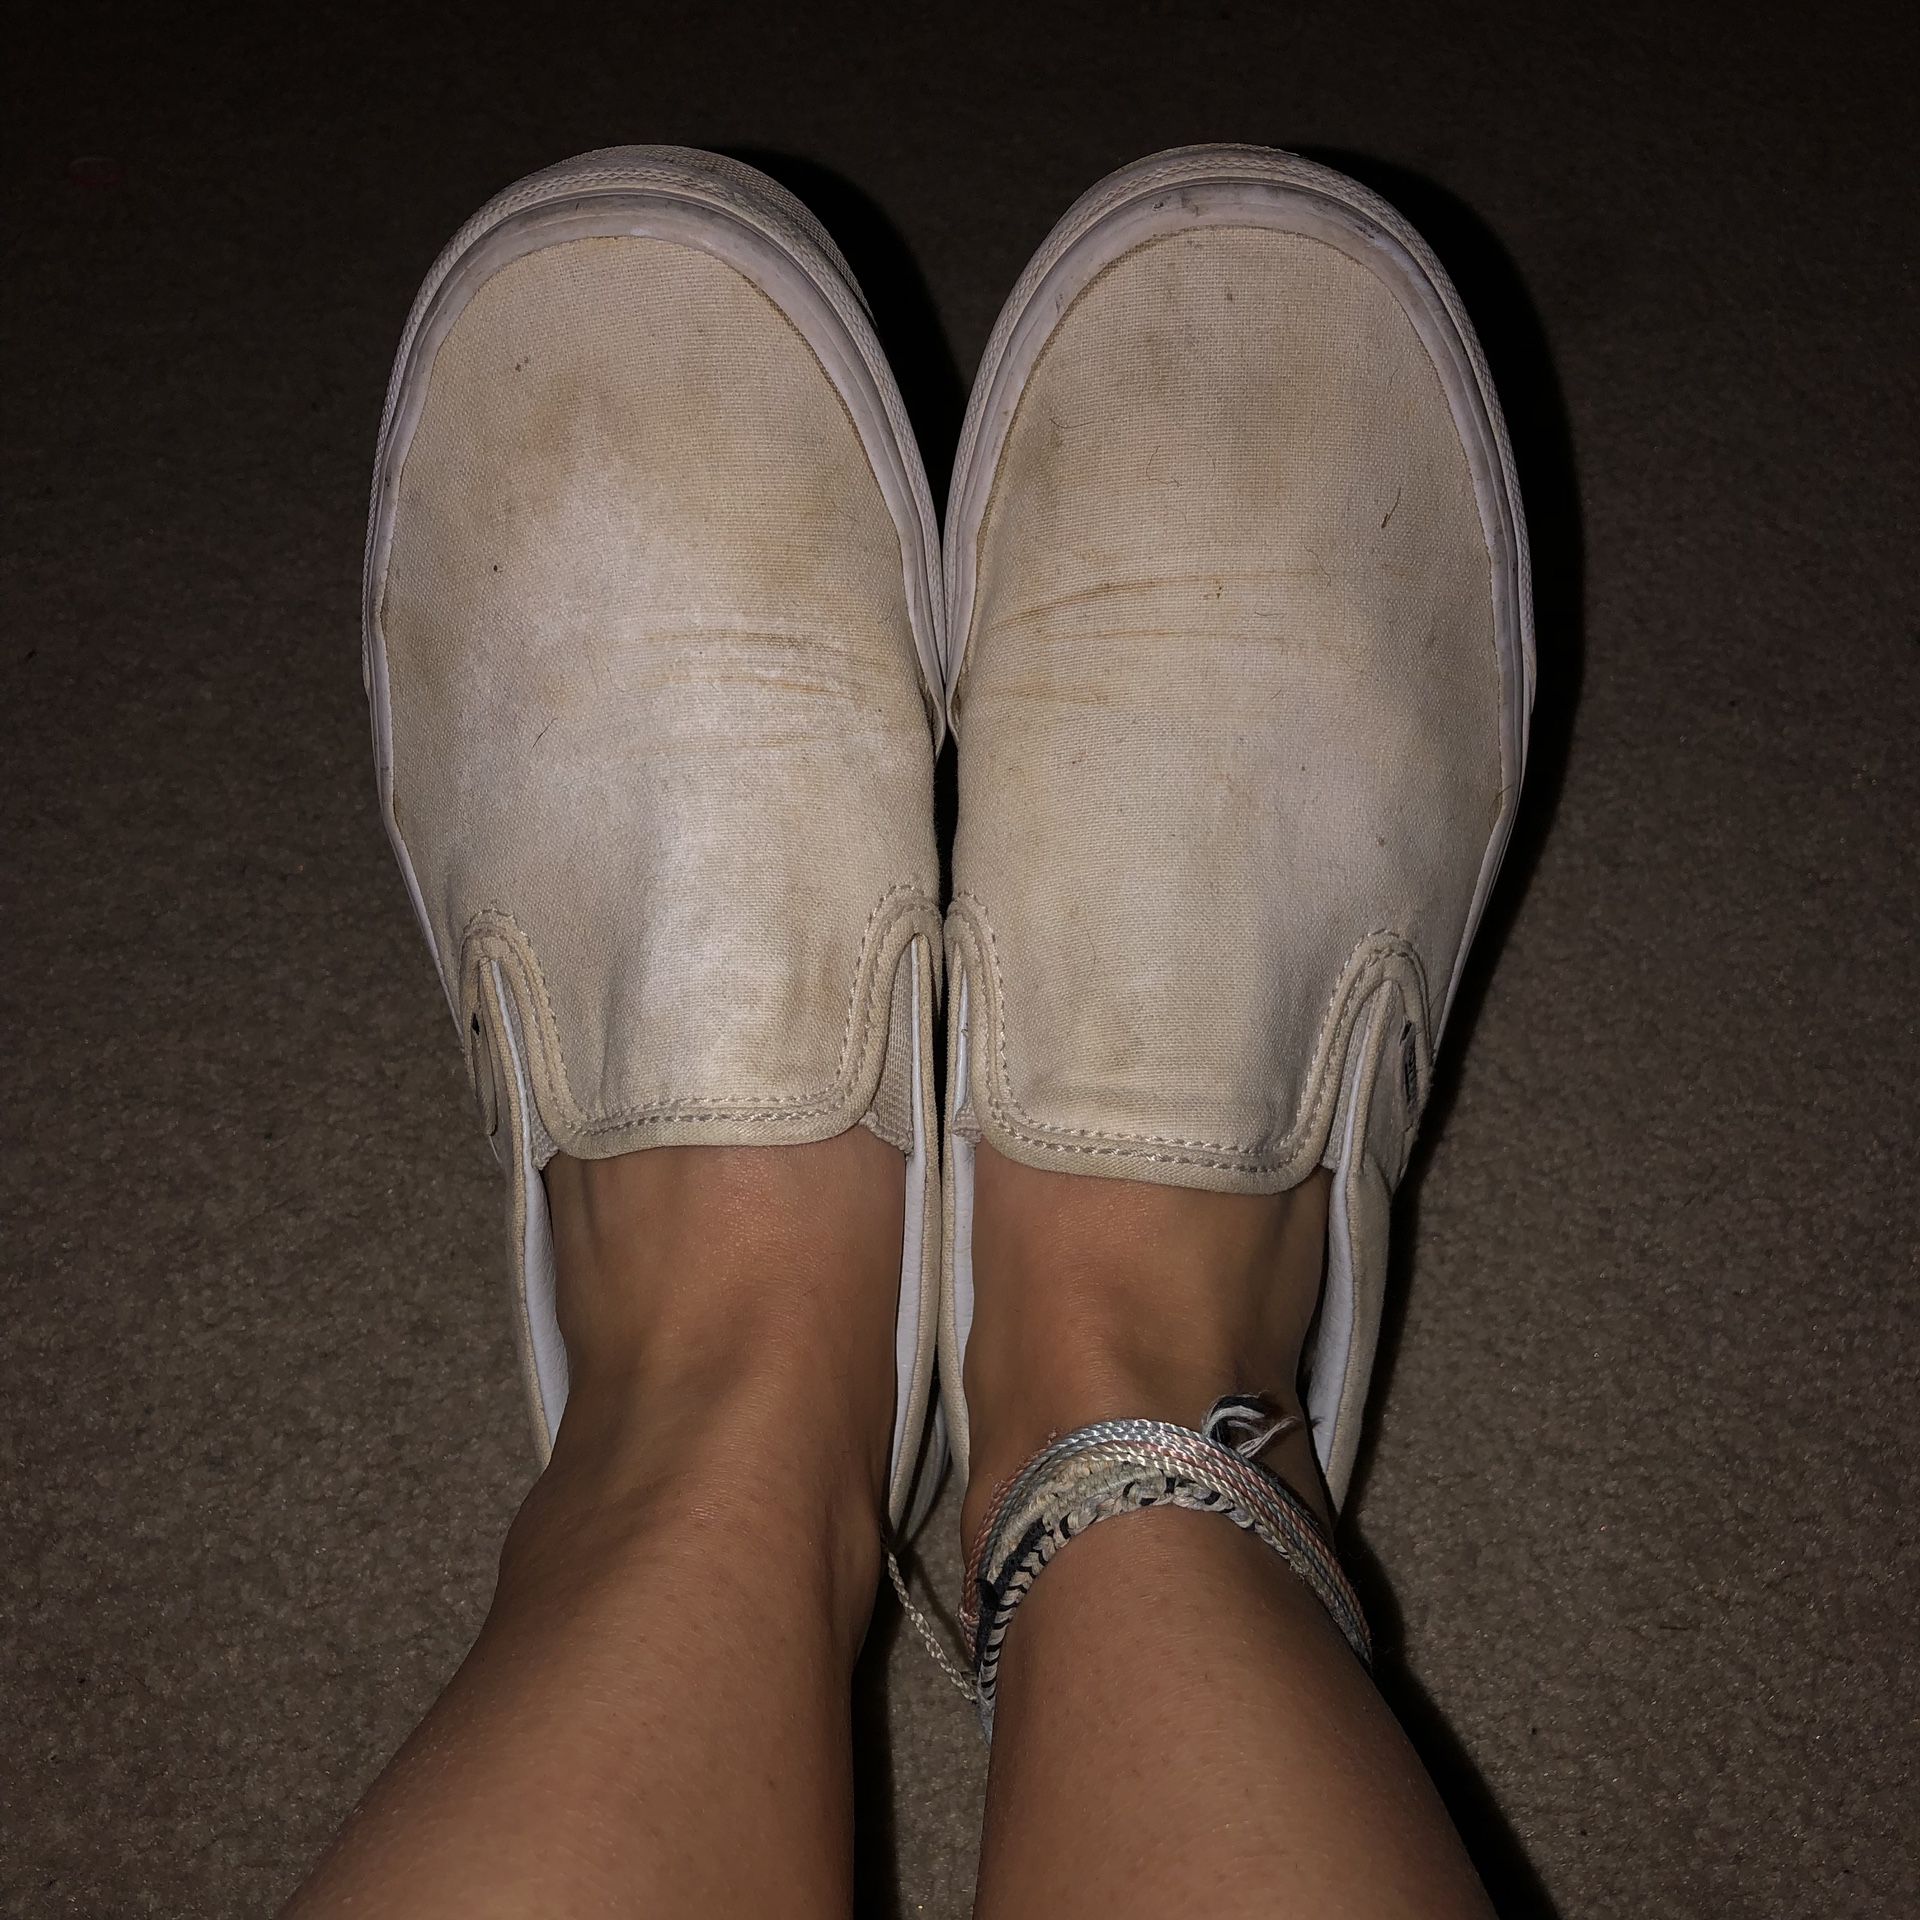 & Smelly White On Vans for Sale in Acworth, GA - OfferUp